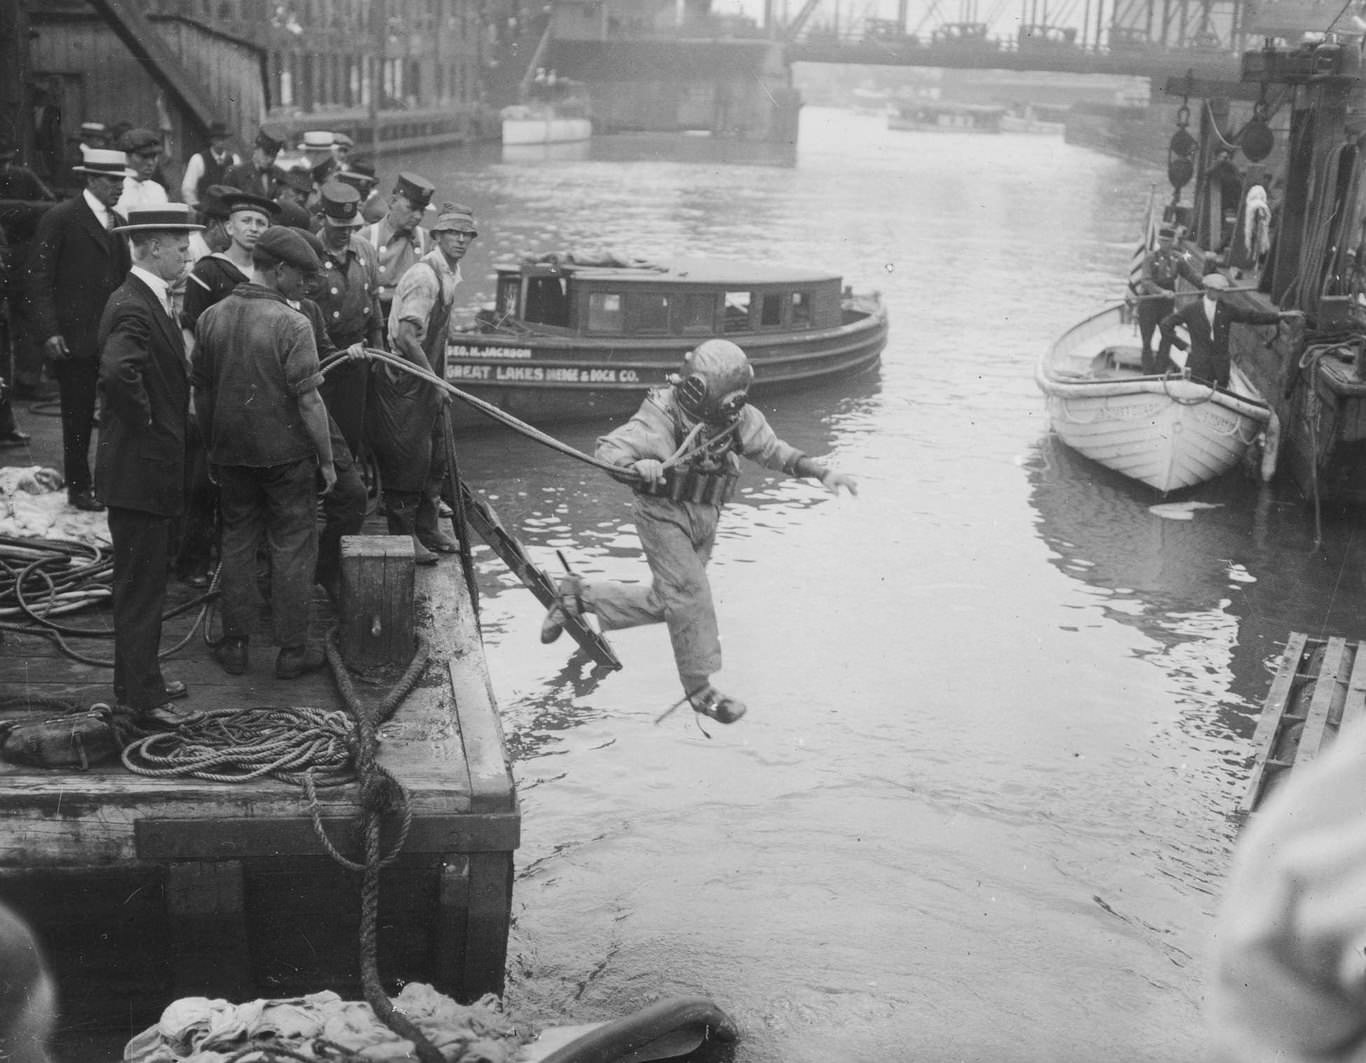 Diver with diving bell leaping into water outside Eastland crash site, Chicago, Illinois, July 24, 1915